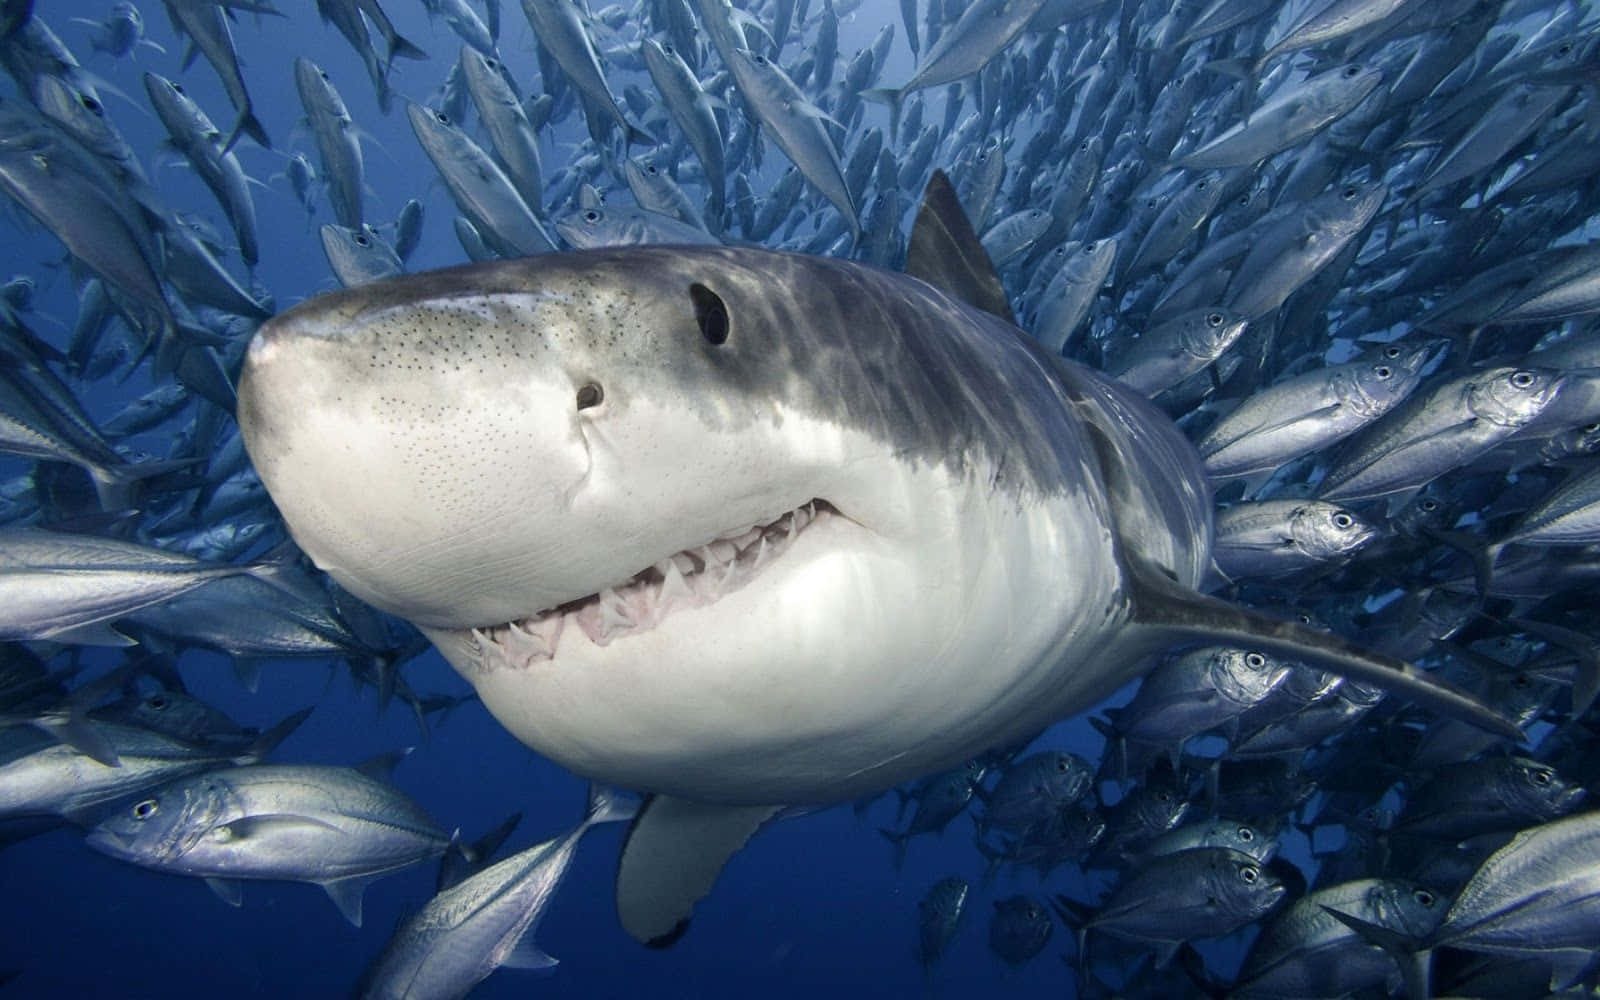 A Great White Shark Swims In The Water With A School Of Fish